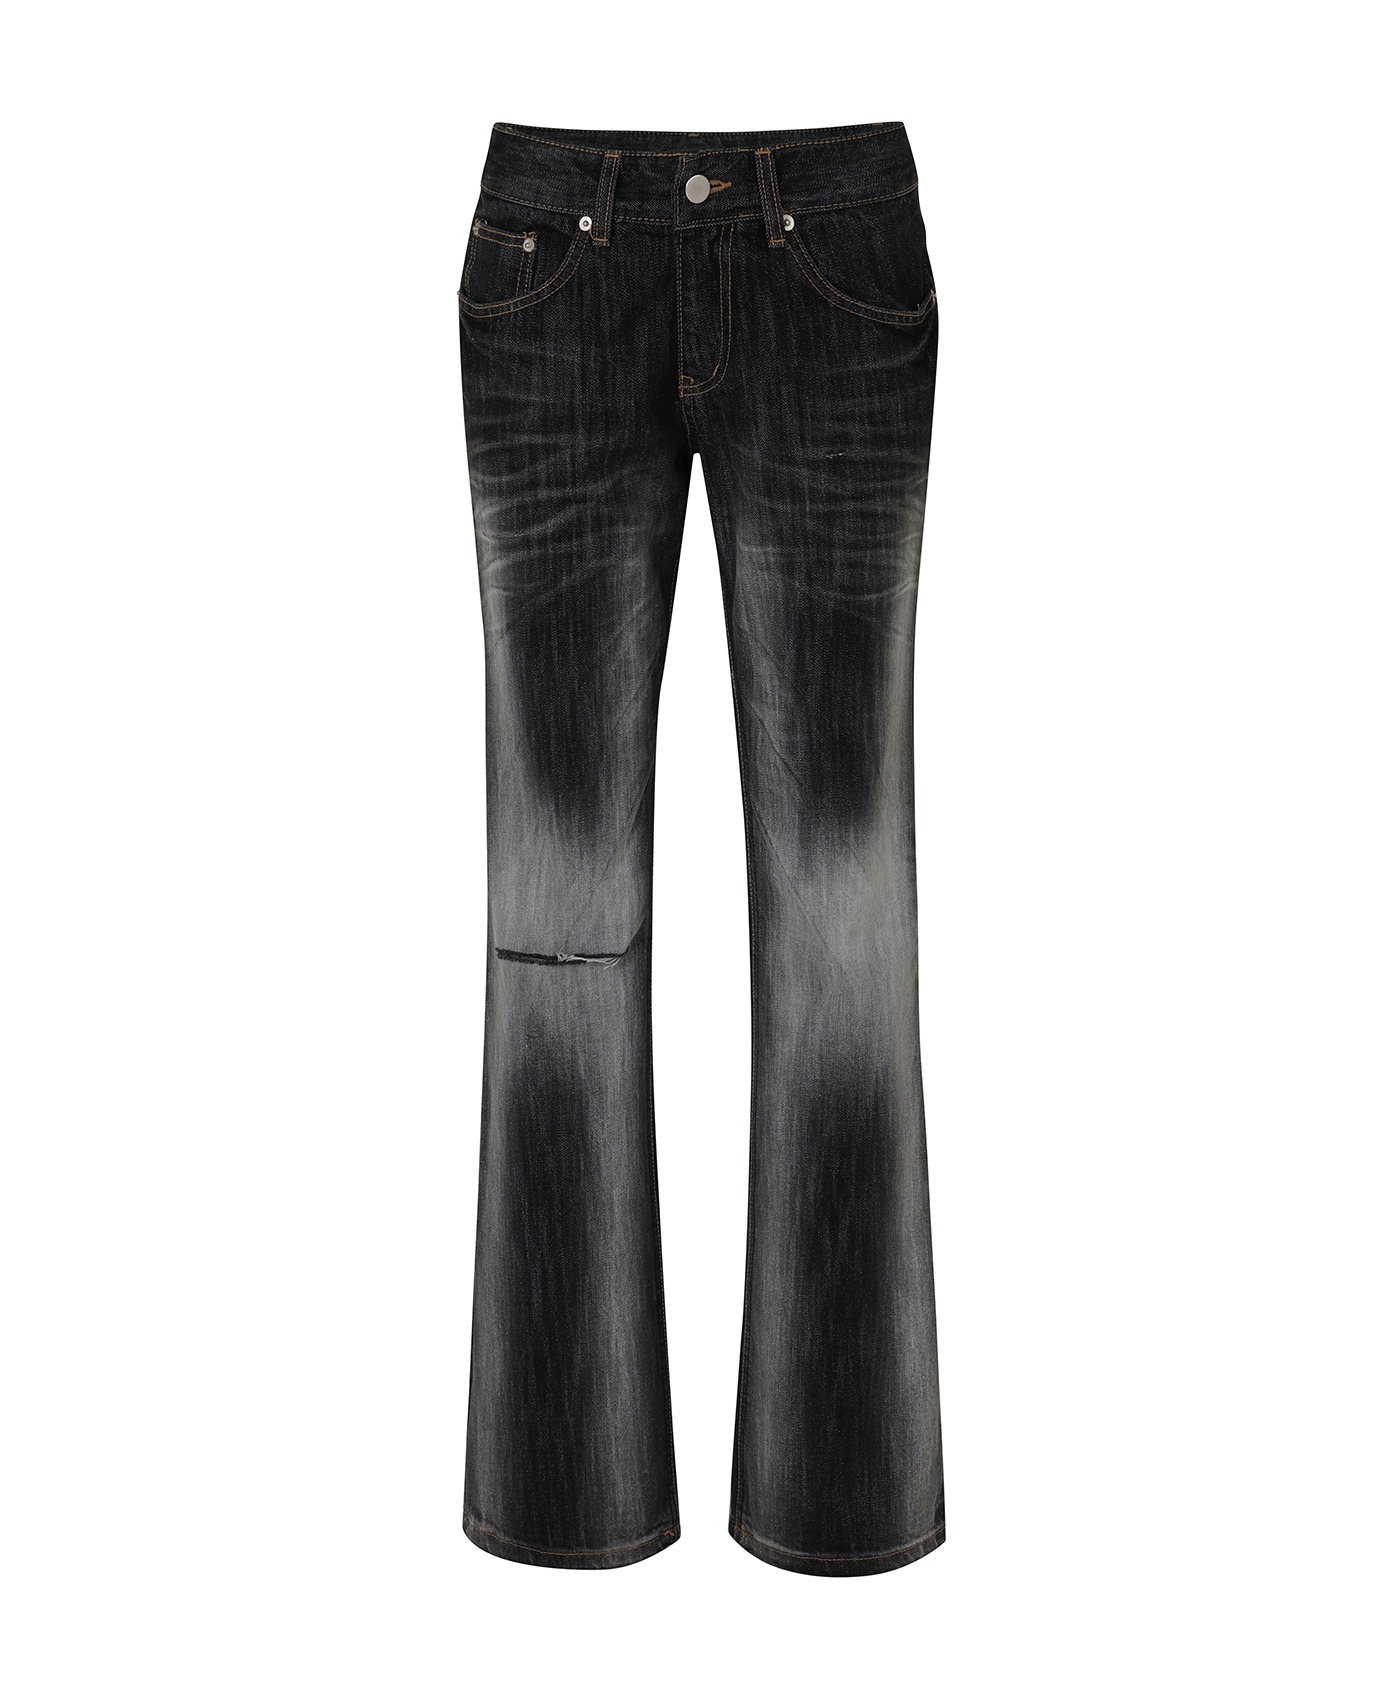 [SOLD OUT] Washing Denim Slim Boots-Cut Jeans